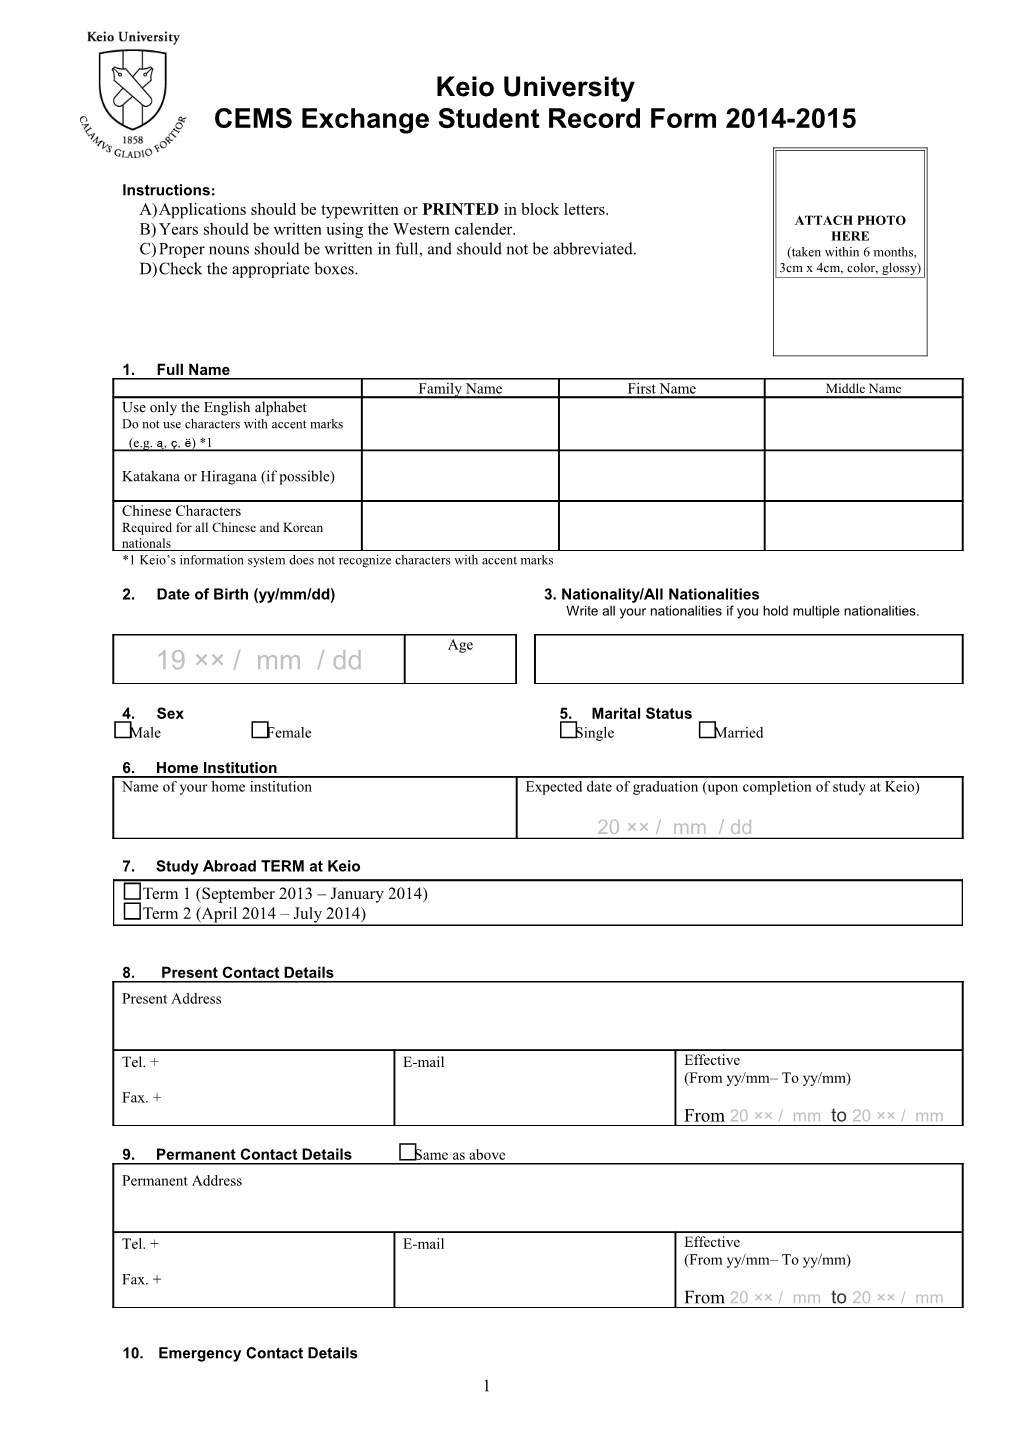 CEMS Exchange Student Record Form2014-2015